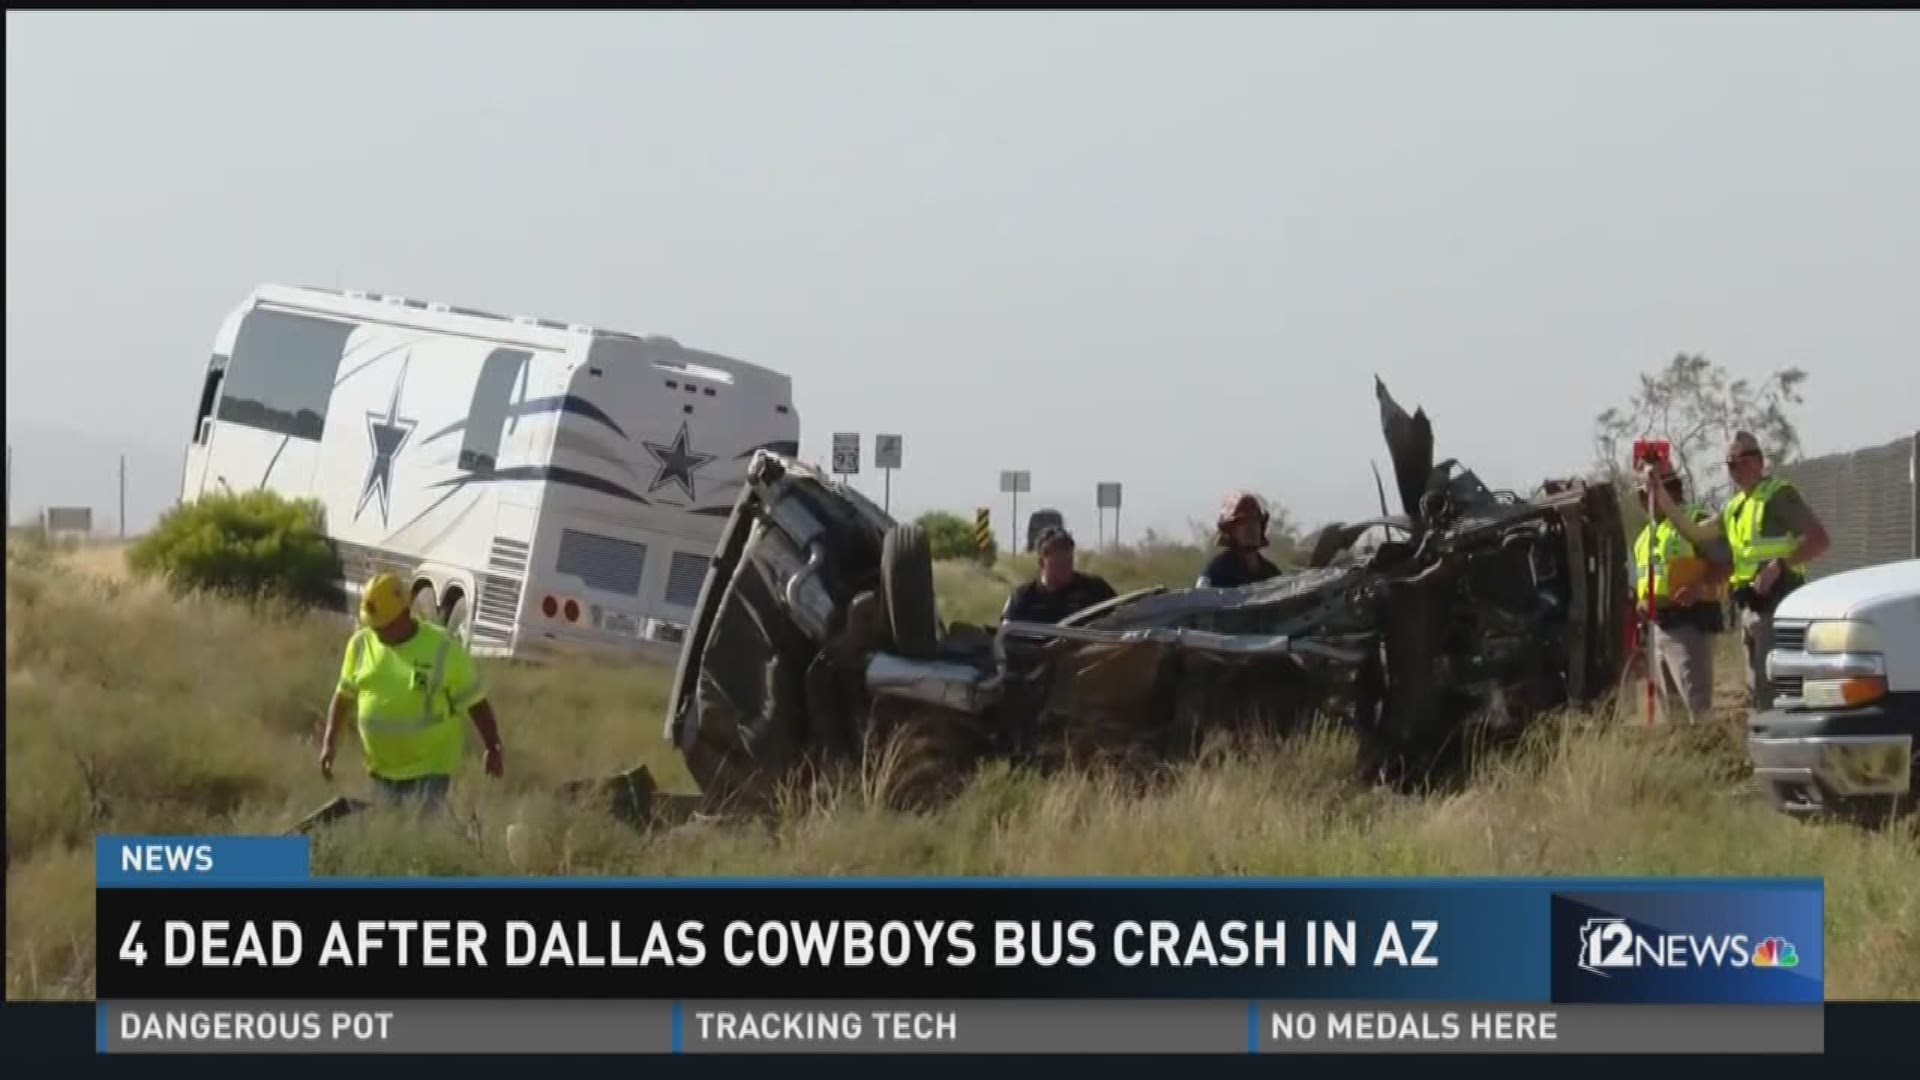 DPS investigators say a van was turning left into traffic when it collided with a Dallas Cowboys bus.